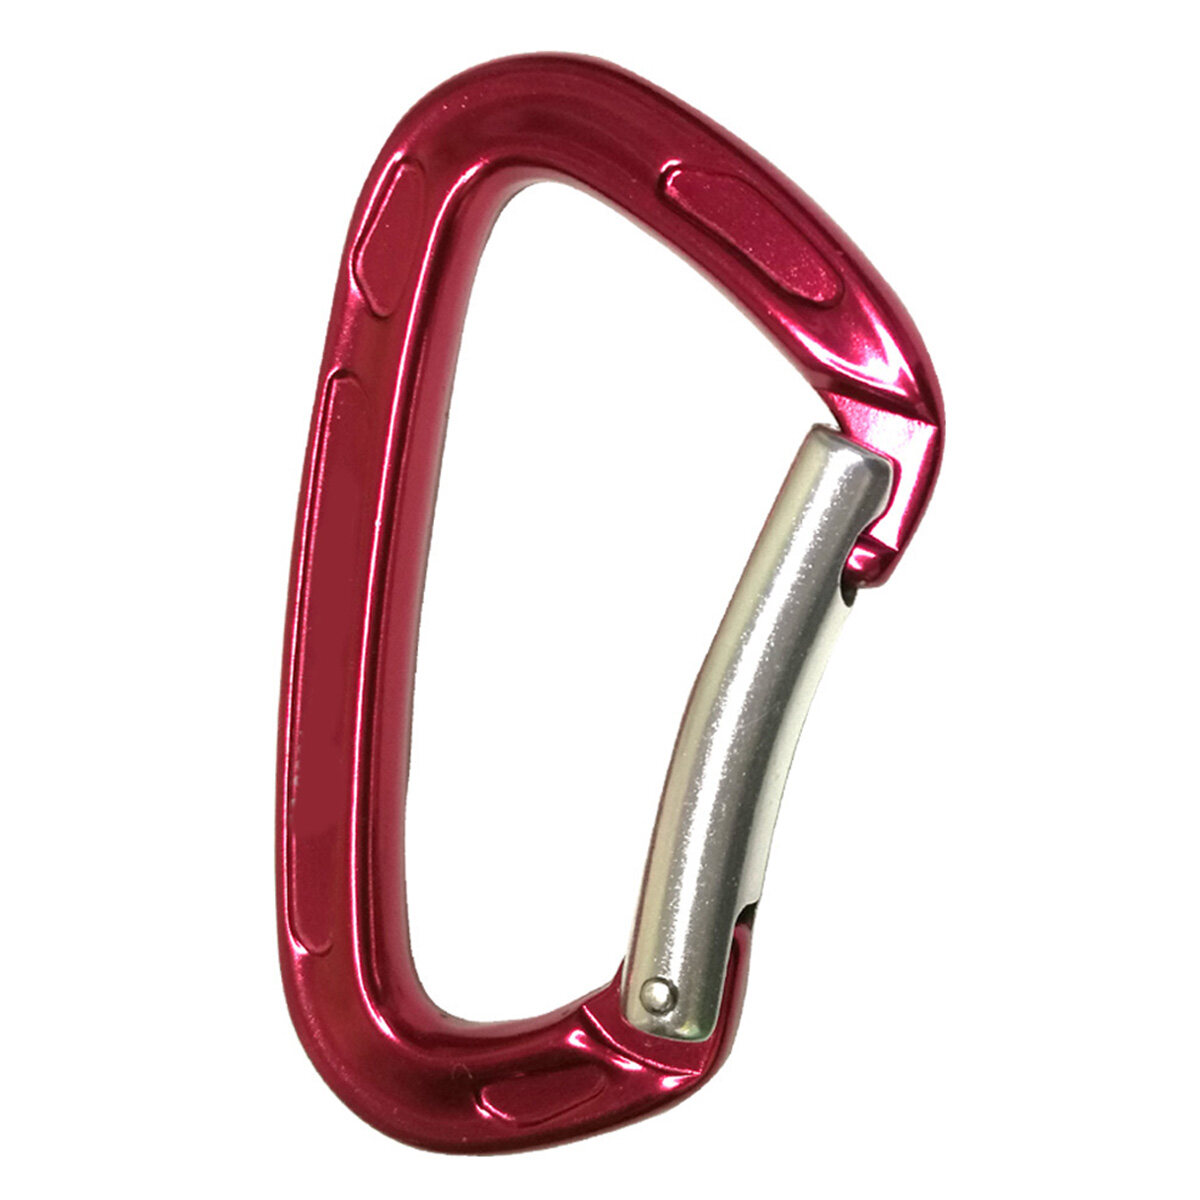 24KN Bent Gate Outdoor Mountaineering Carabiner Mountaineering Rappelling Rescue Caving Aluminum Locking